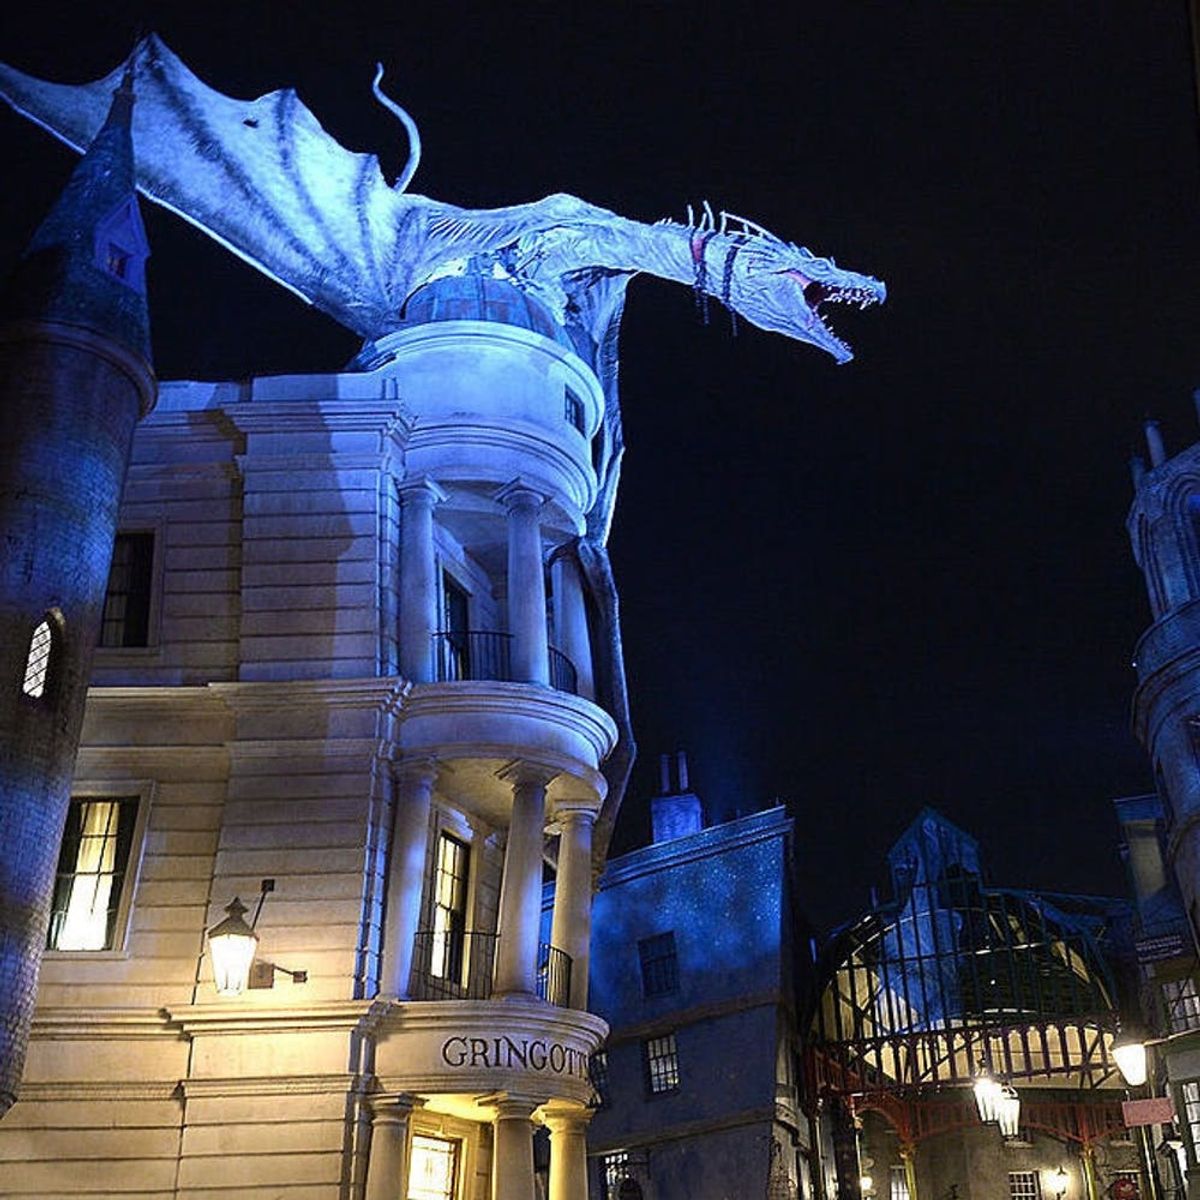 A New Thrill Ride Is Coming to Universal’s Wizarding World of Harry Potter